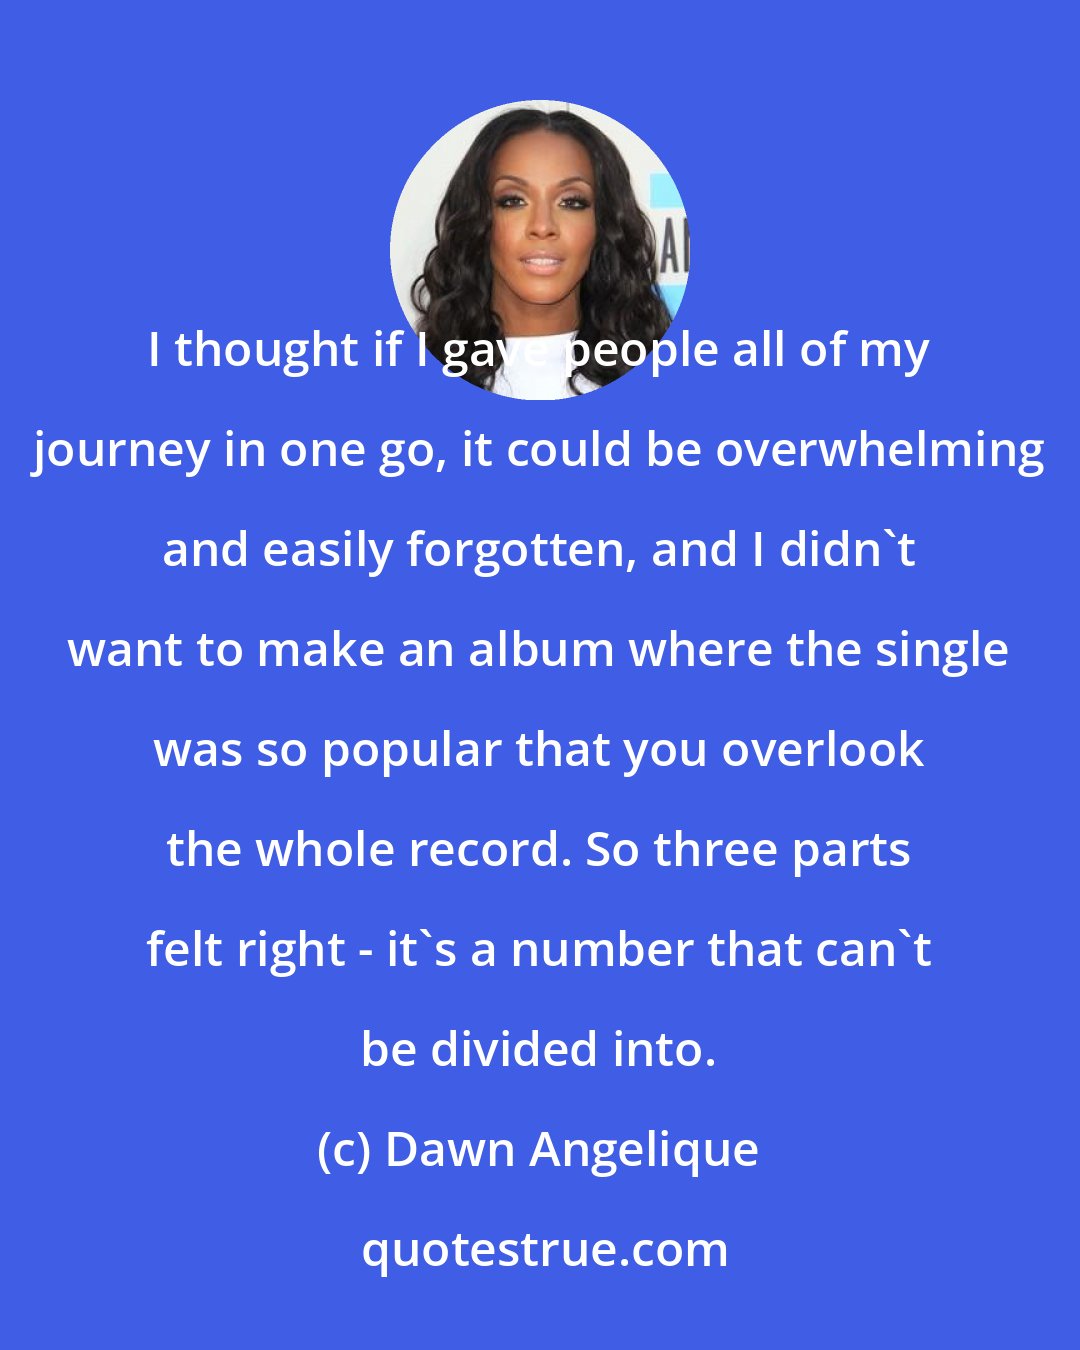 Dawn Angelique: I thought if I gave people all of my journey in one go, it could be overwhelming and easily forgotten, and I didn't want to make an album where the single was so popular that you overlook the whole record. So three parts felt right - it's a number that can't be divided into.